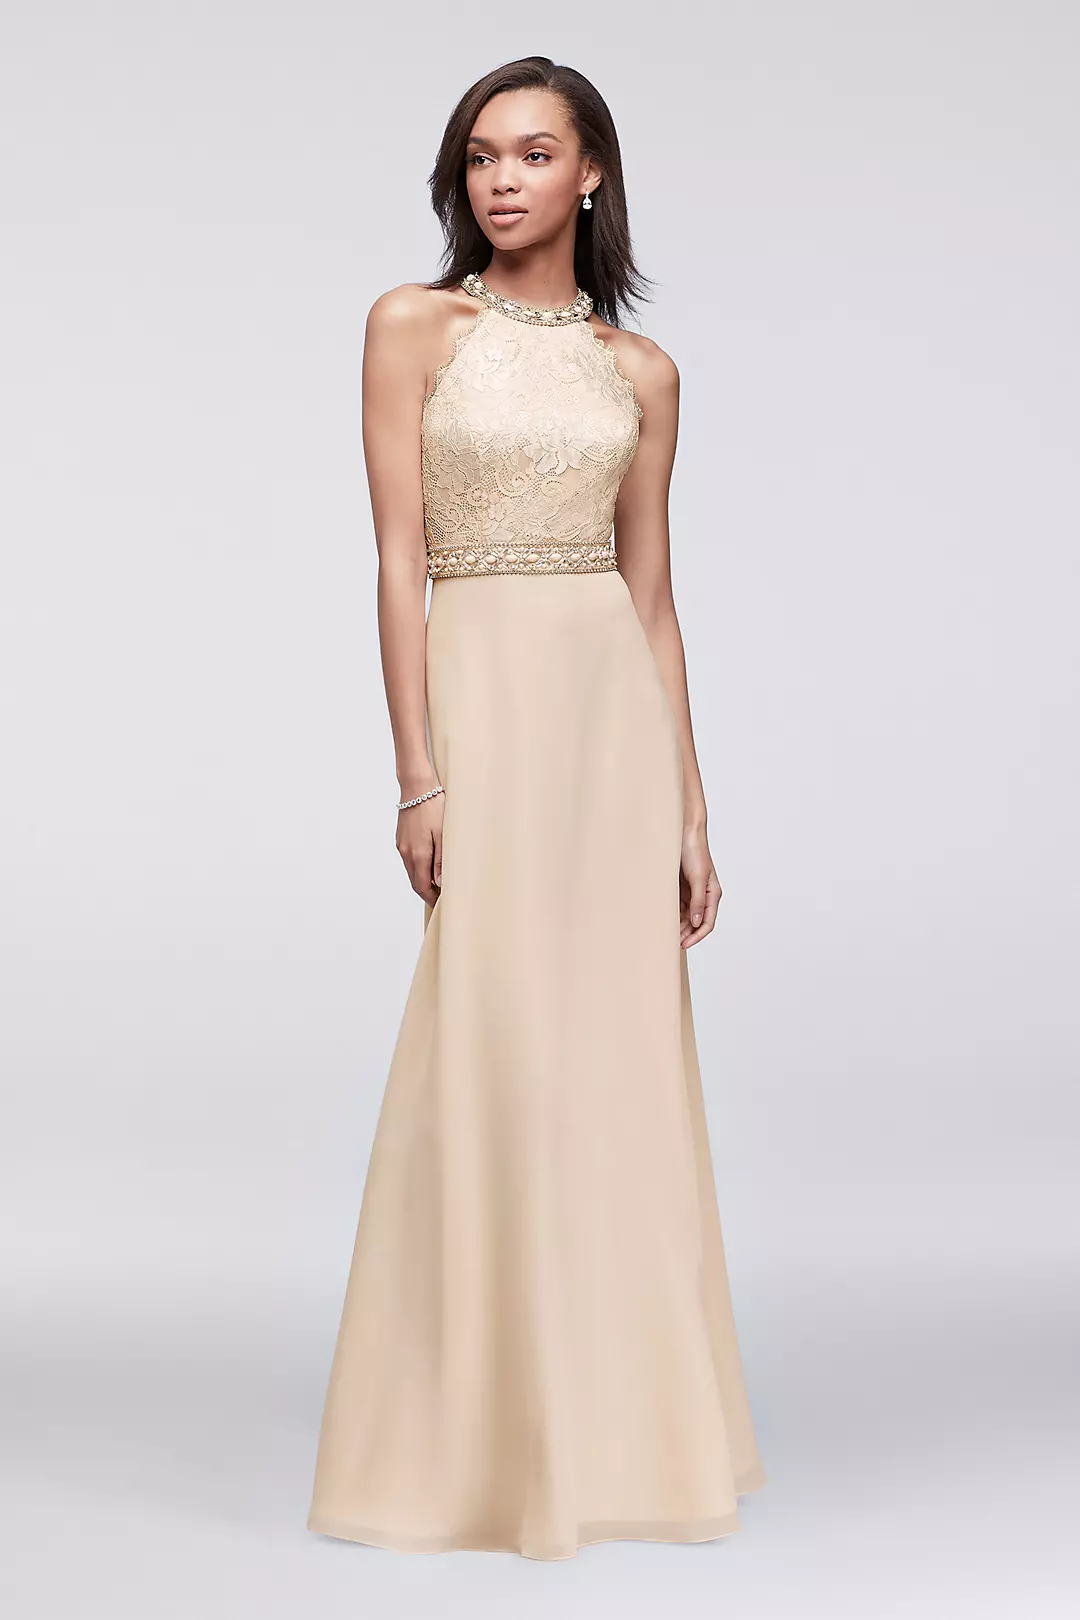 Lace and Chiffon Gown with Beaded High-Neck Bodice Image